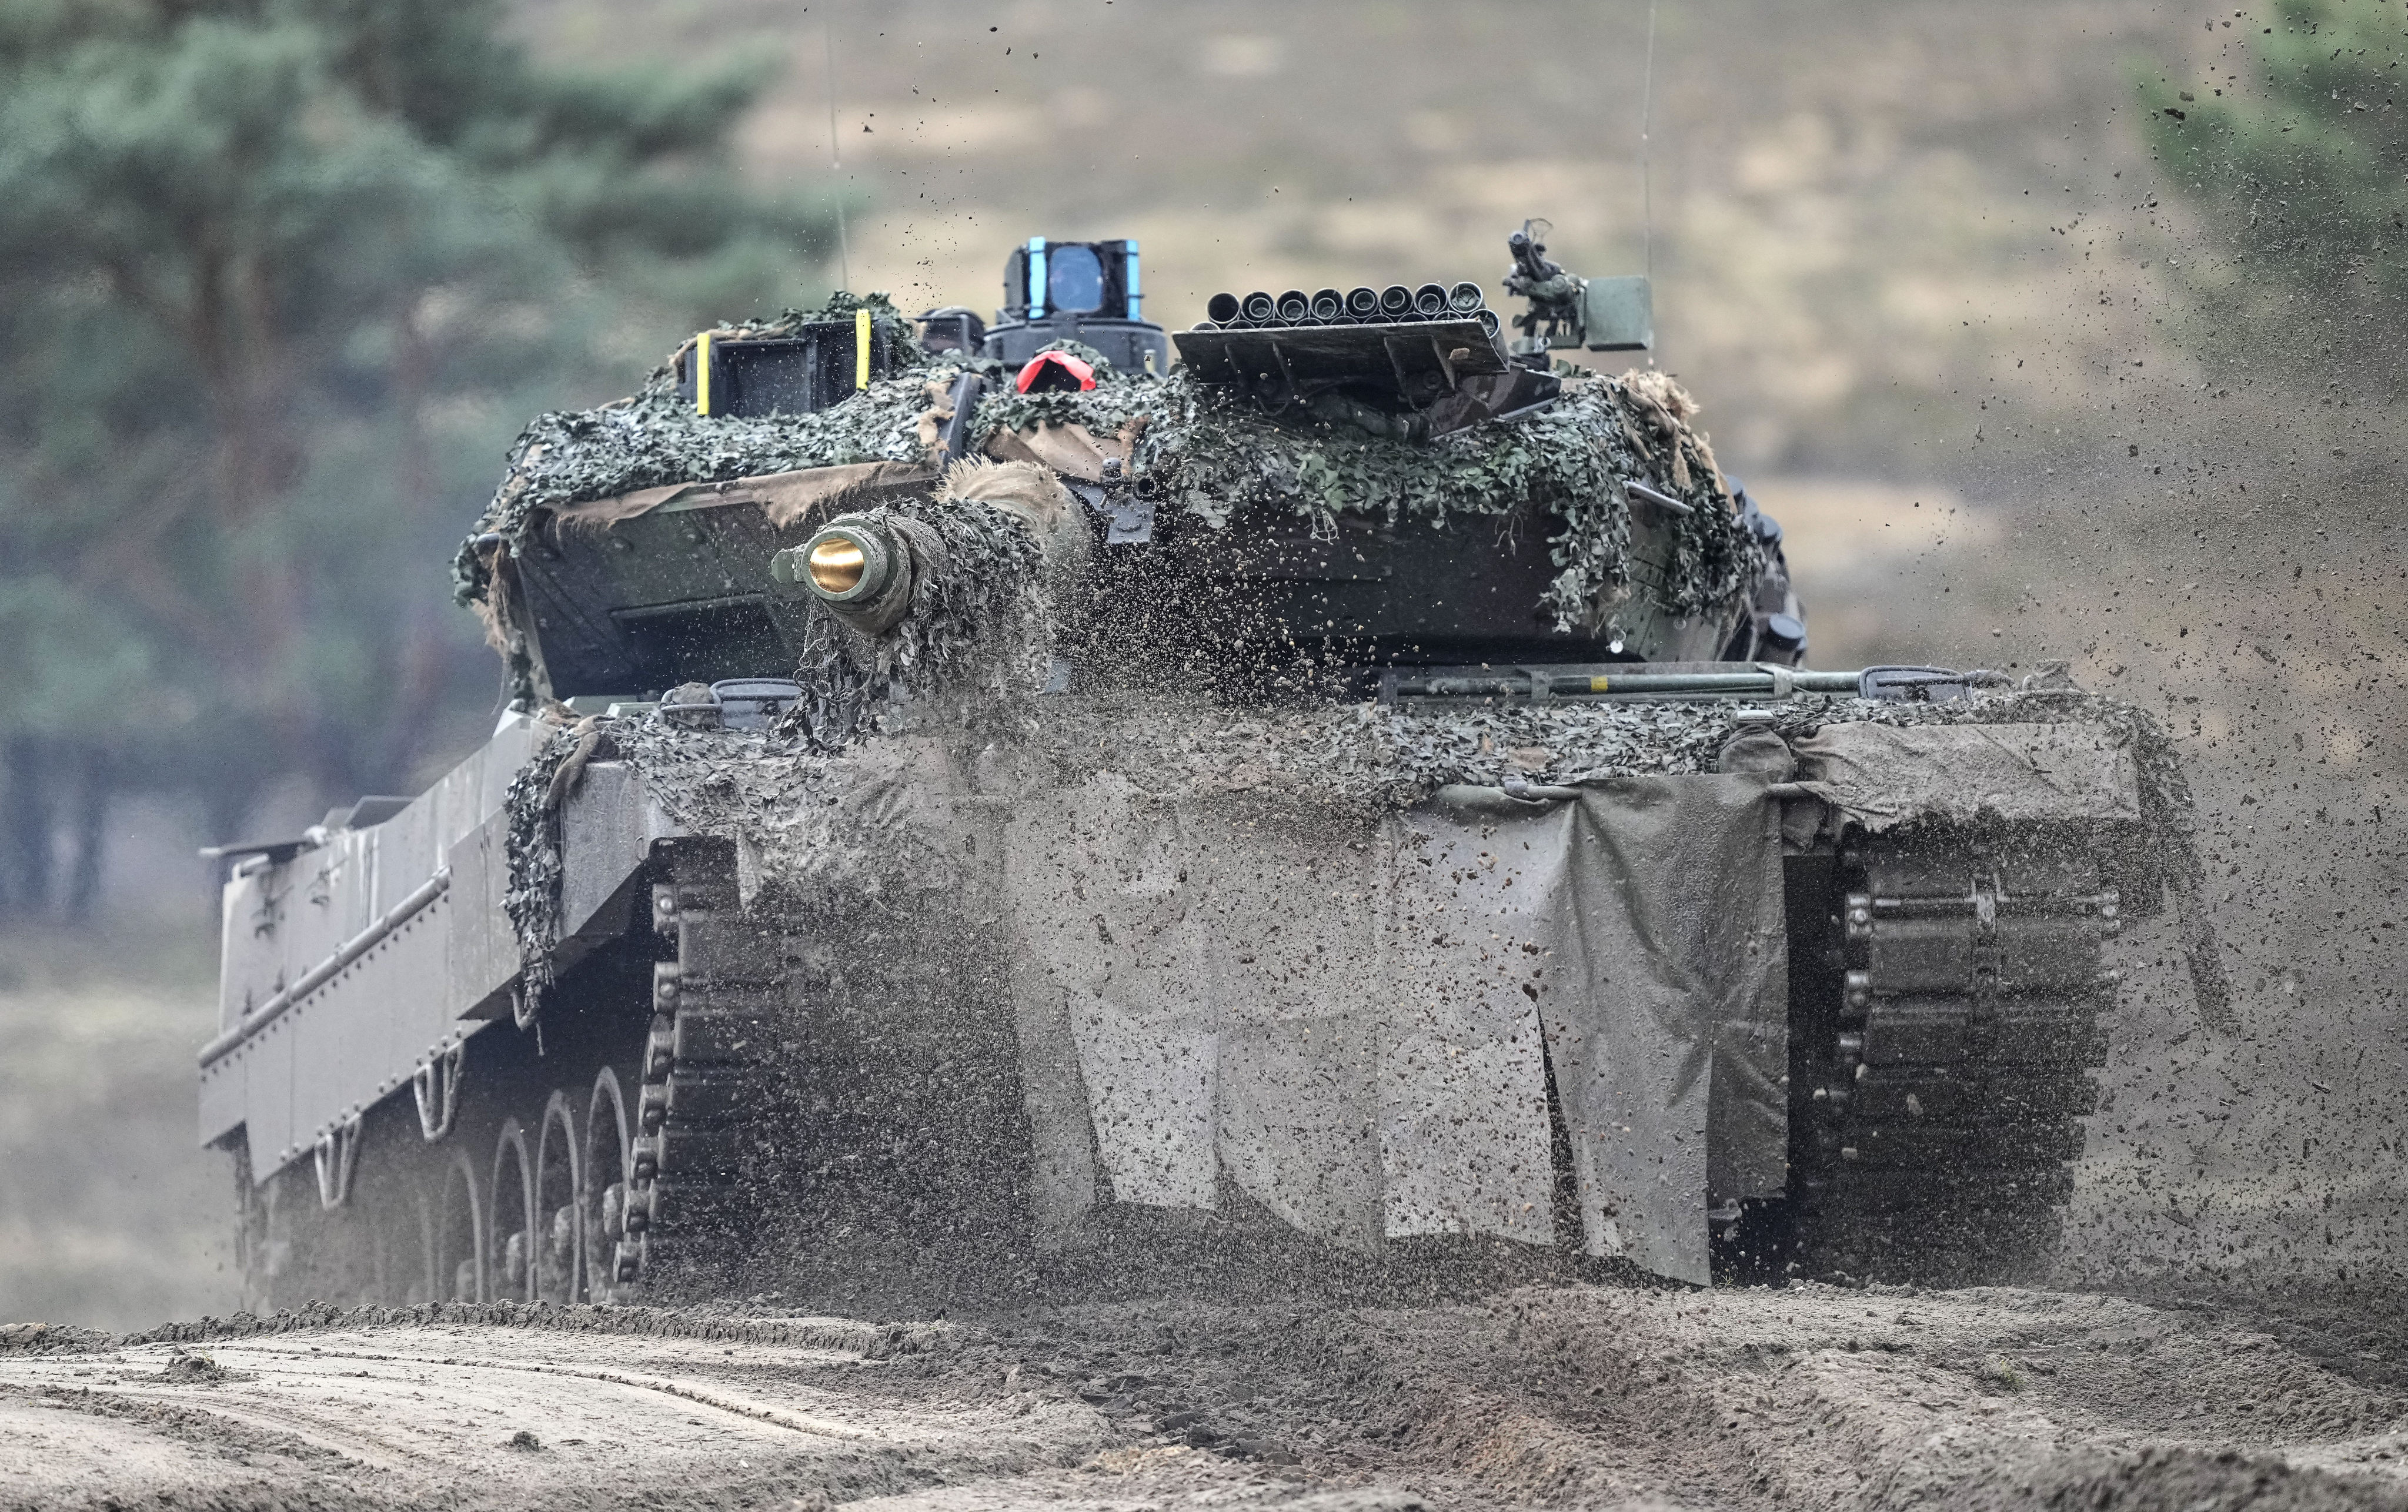 A Leopard 2 tank undergoes drills at the Bundeswehr tank battalion 203 at the Field Marshal Rommel Barracks in Augustdorf, Germany, on February 1. An independent Sweden-based watchdog says world military spending has grown for the eighth consecutive year to an all-time high of US$2.24 trillion, with 13 per cent of the rise taking place in Europe, chiefly because of Russian and Ukrainian spending. Photo: AP